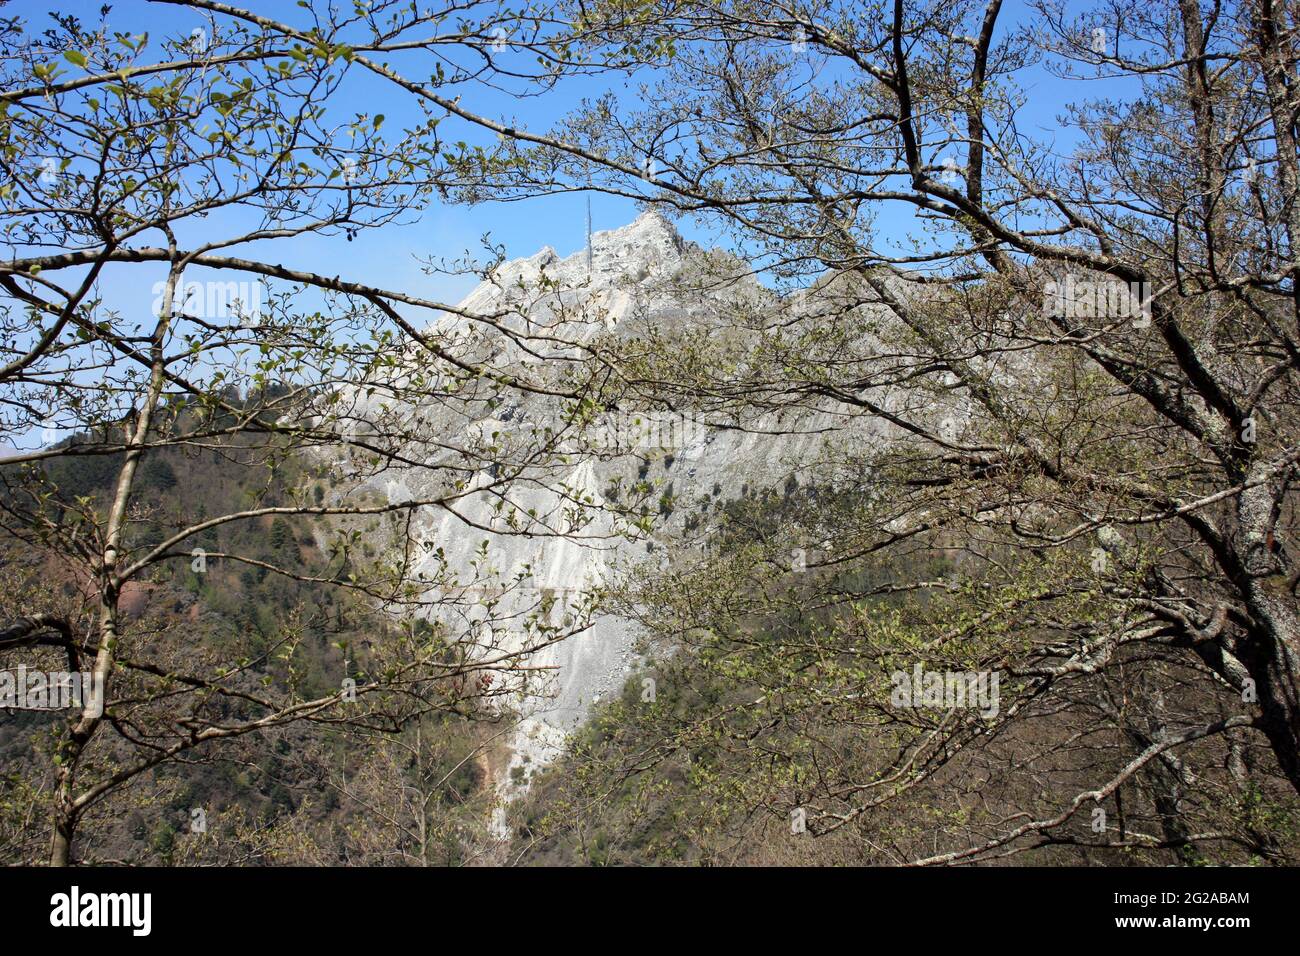 fantastic landscape valley of Monte Pasquilio and the Apuan Alps on the summit Stock Photo